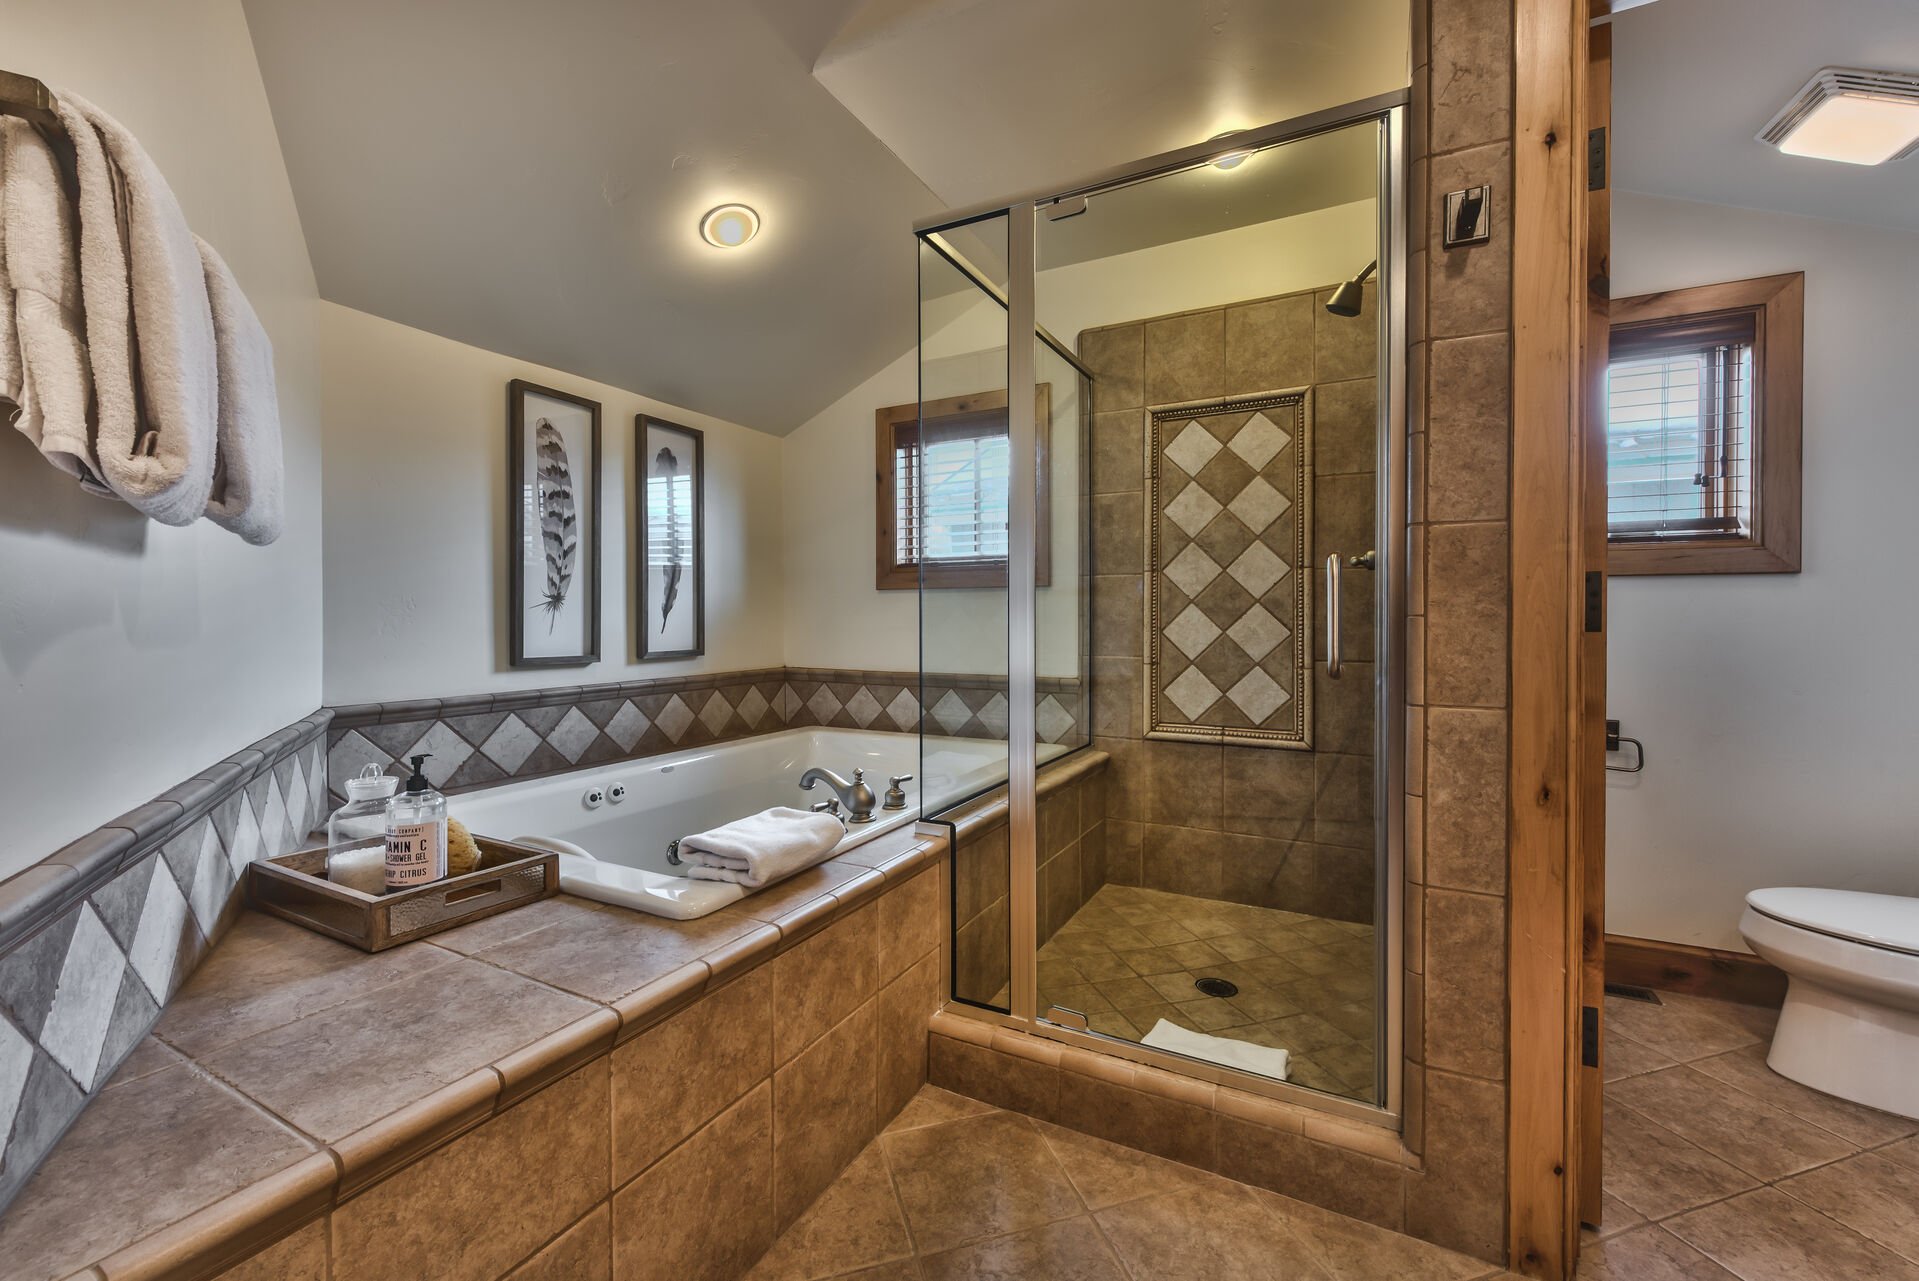 Grand Master Bath with Dual Sinks, Tile Shower and Jetted Tub